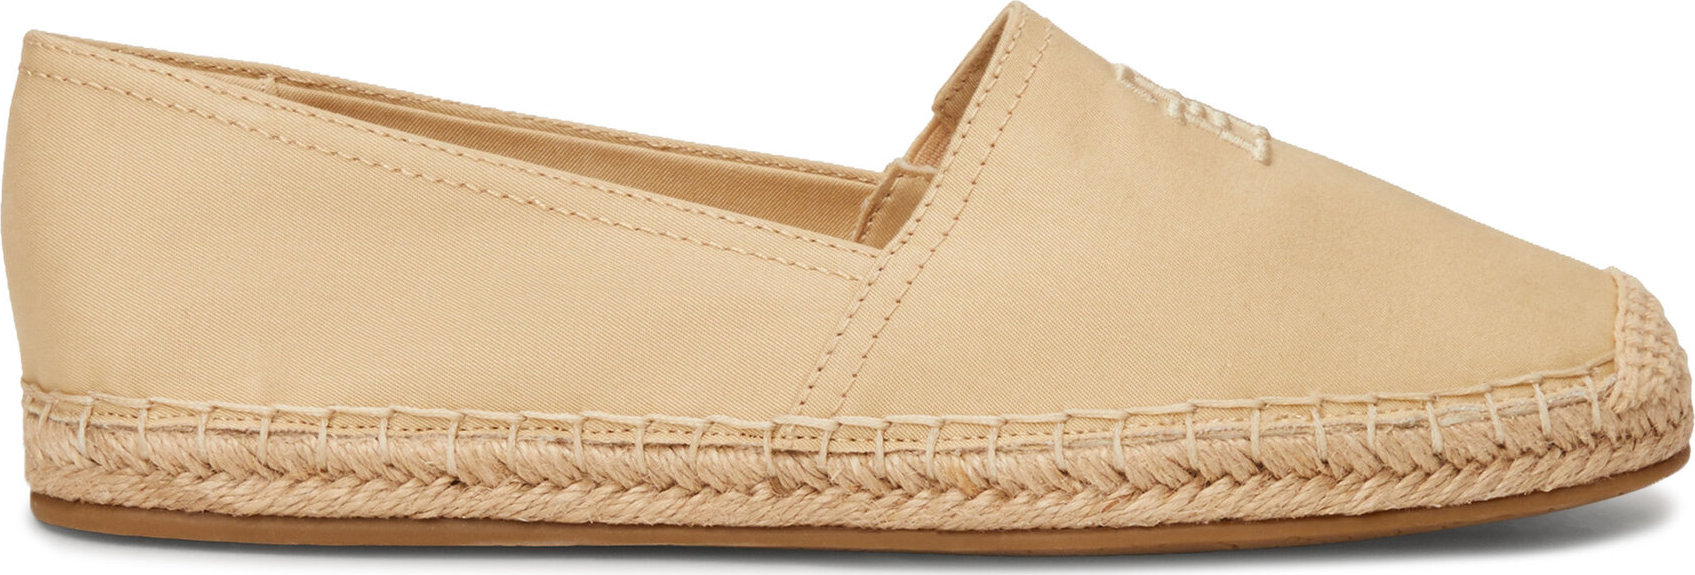 Espadrilky Tommy Hilfiger Embroidered Flat Espadrille FW0FW07721 Harvest Wheat ACR